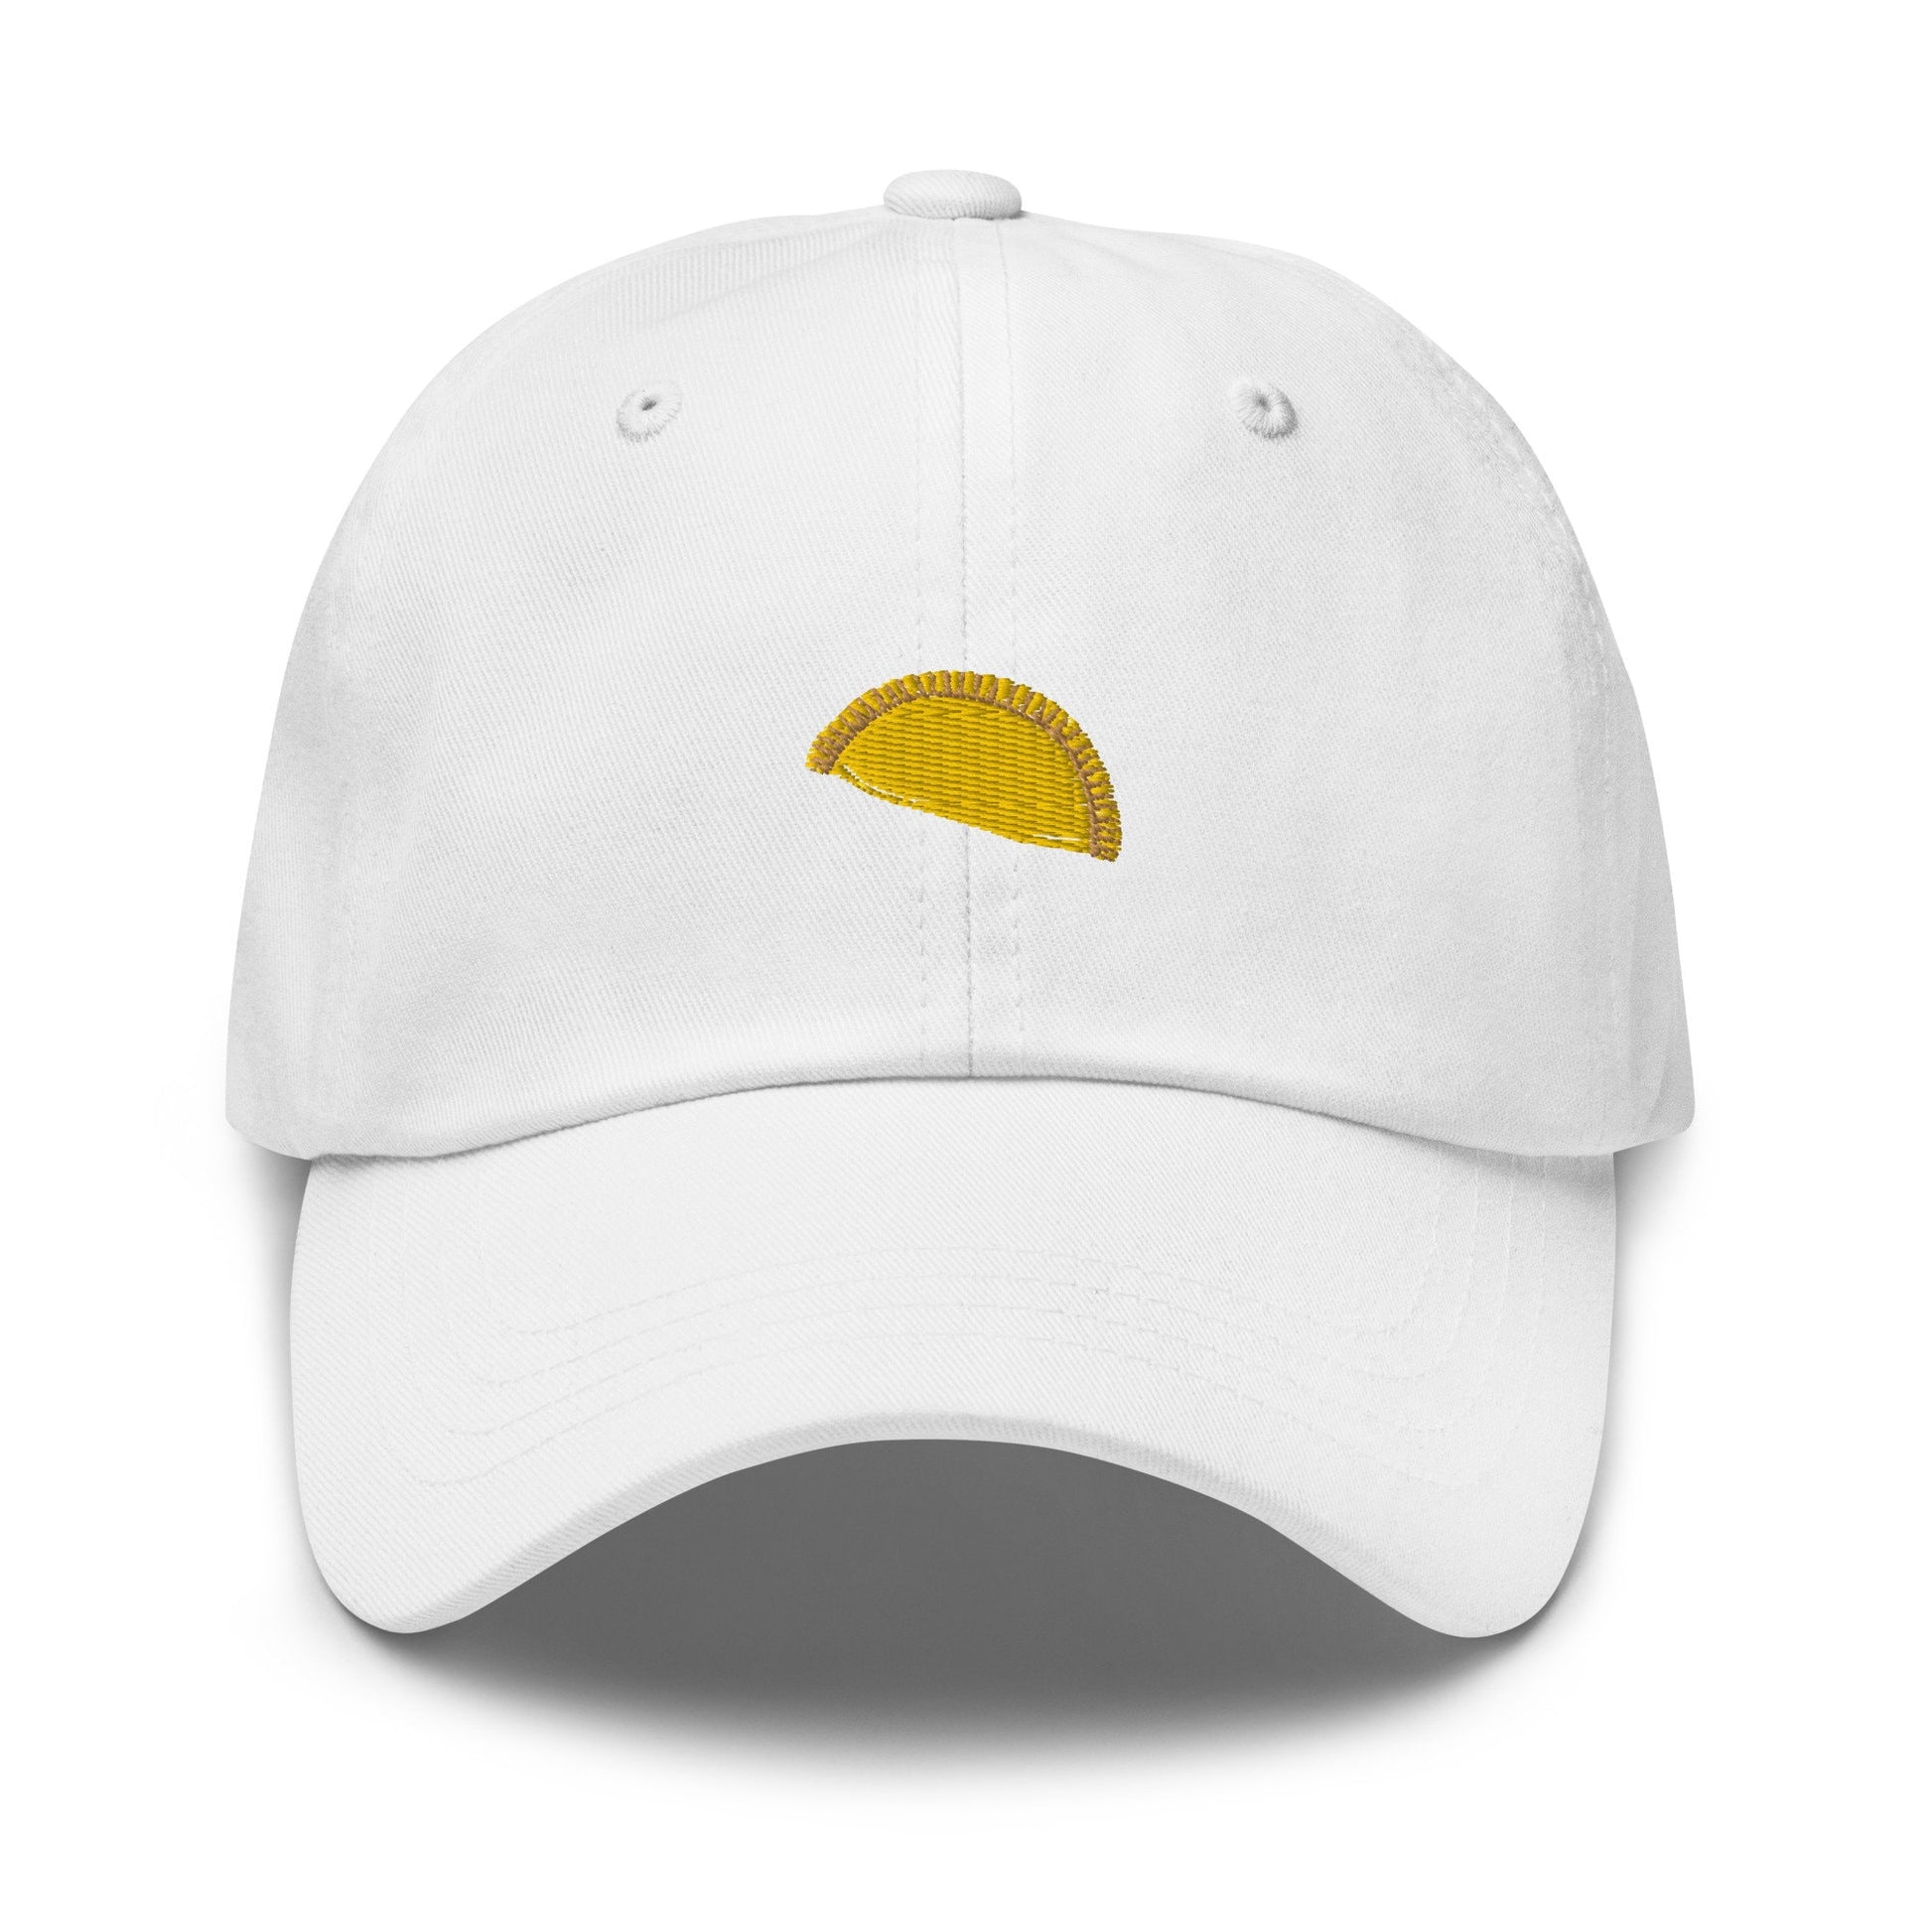 Jamaican Patty Hat - Caribbean Savoury Pastries From Heaven - Spicy Hand Pie - Cotton Embroidered Baseball Cap - Multiple Colors